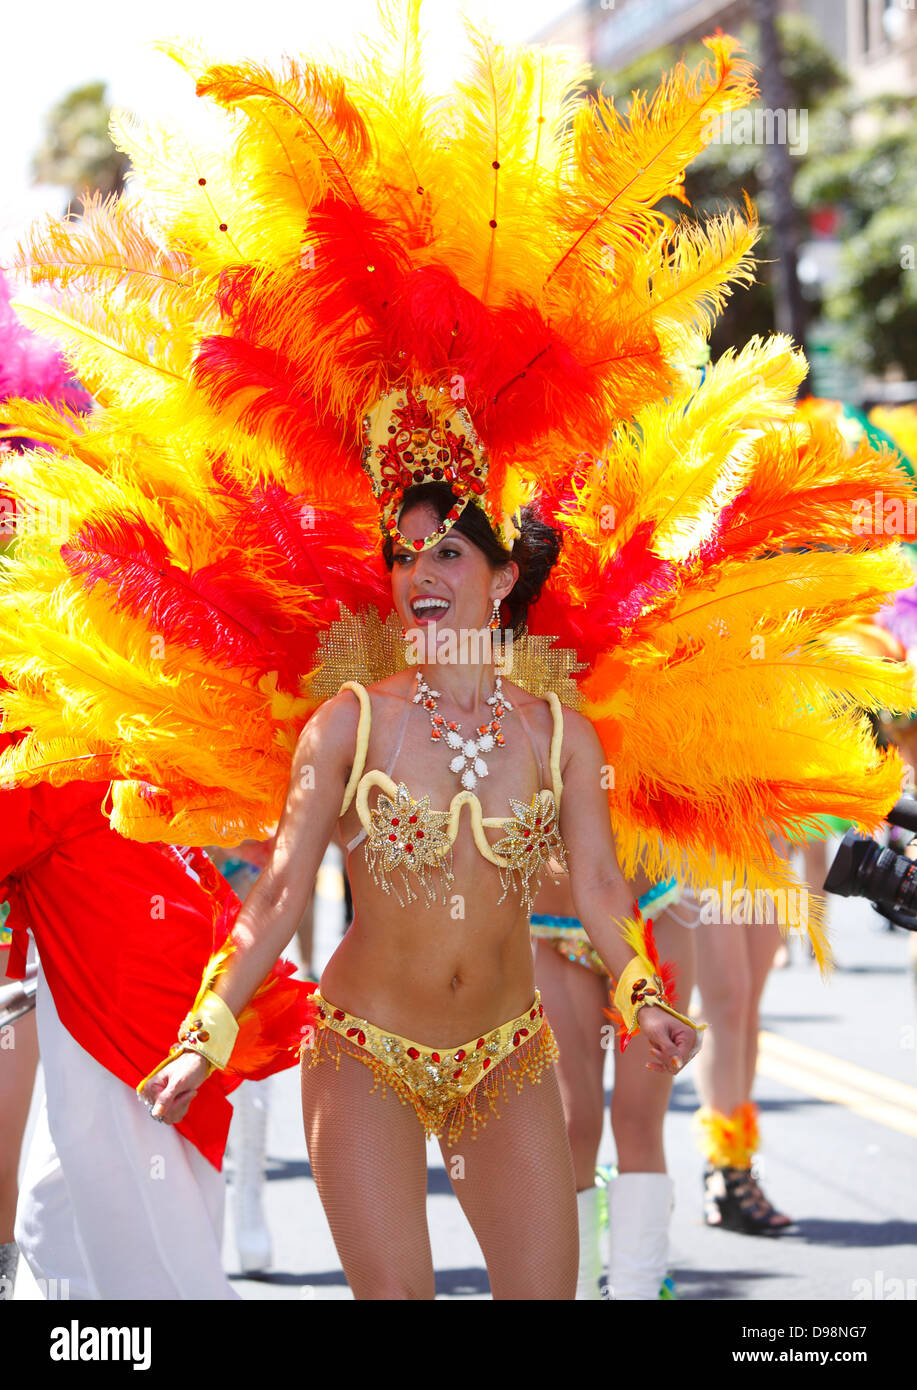 Colorful dancer with feathers at carnaval parade in Mission District, San Francisco, California, USA Stock Photo